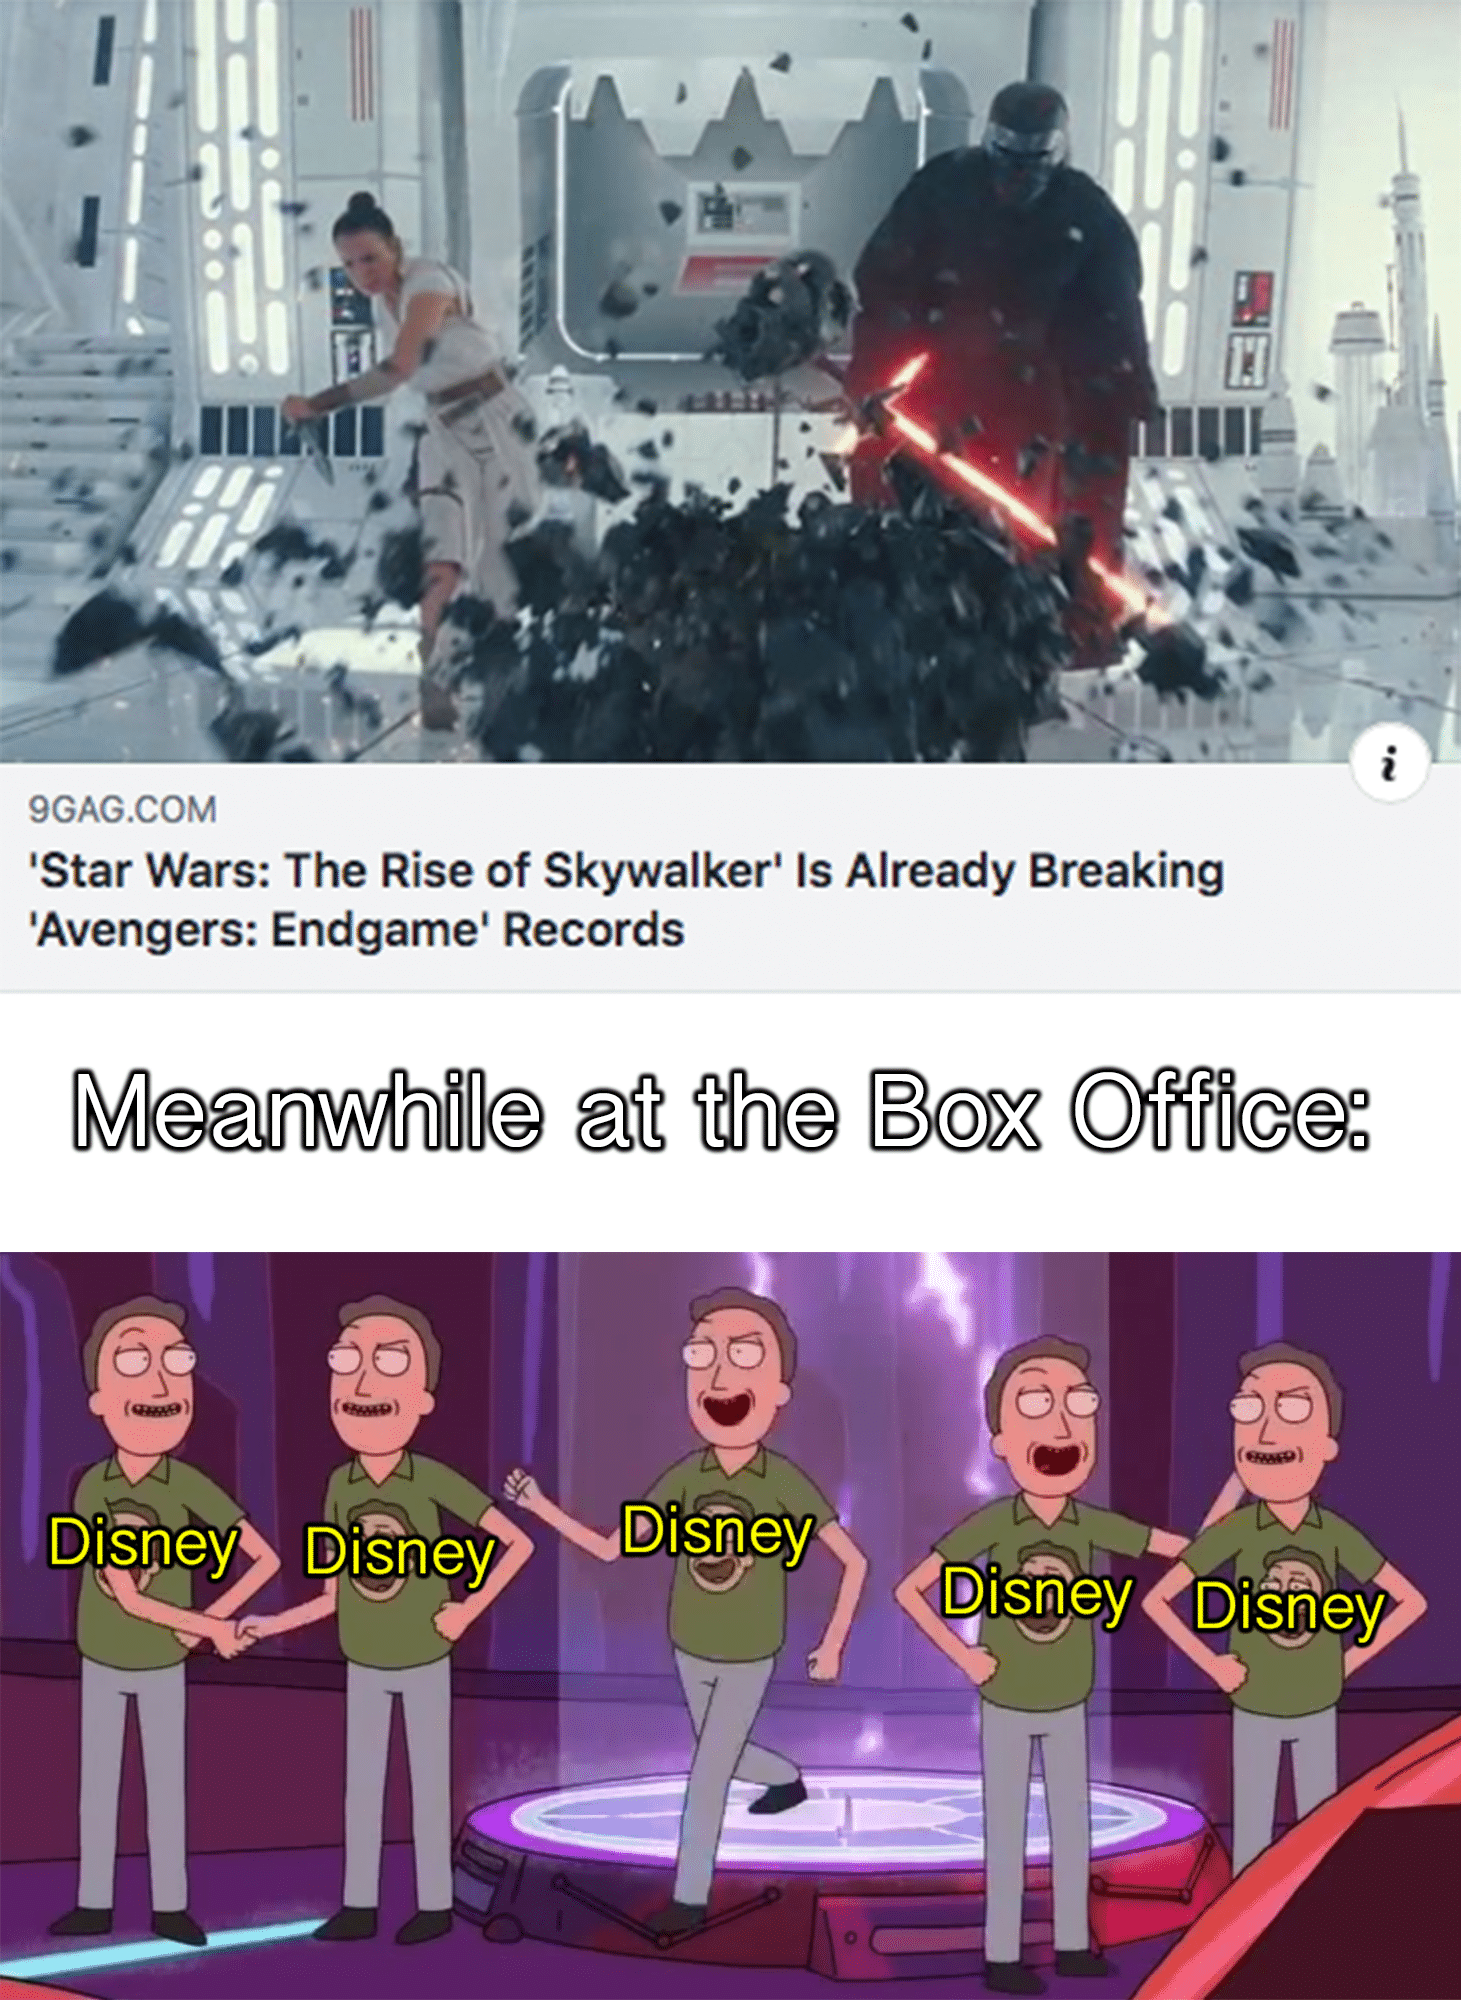 Dank Meme dank-memes cute text: 9GAG.COM 'Star Wars: The Rise of Skywalker' Is Already Breaking 'Avengers: Endgame' Records Meanwhile at the Box Office: DiSpey AS'DisOéy Dismey Disney DLSh9Y 